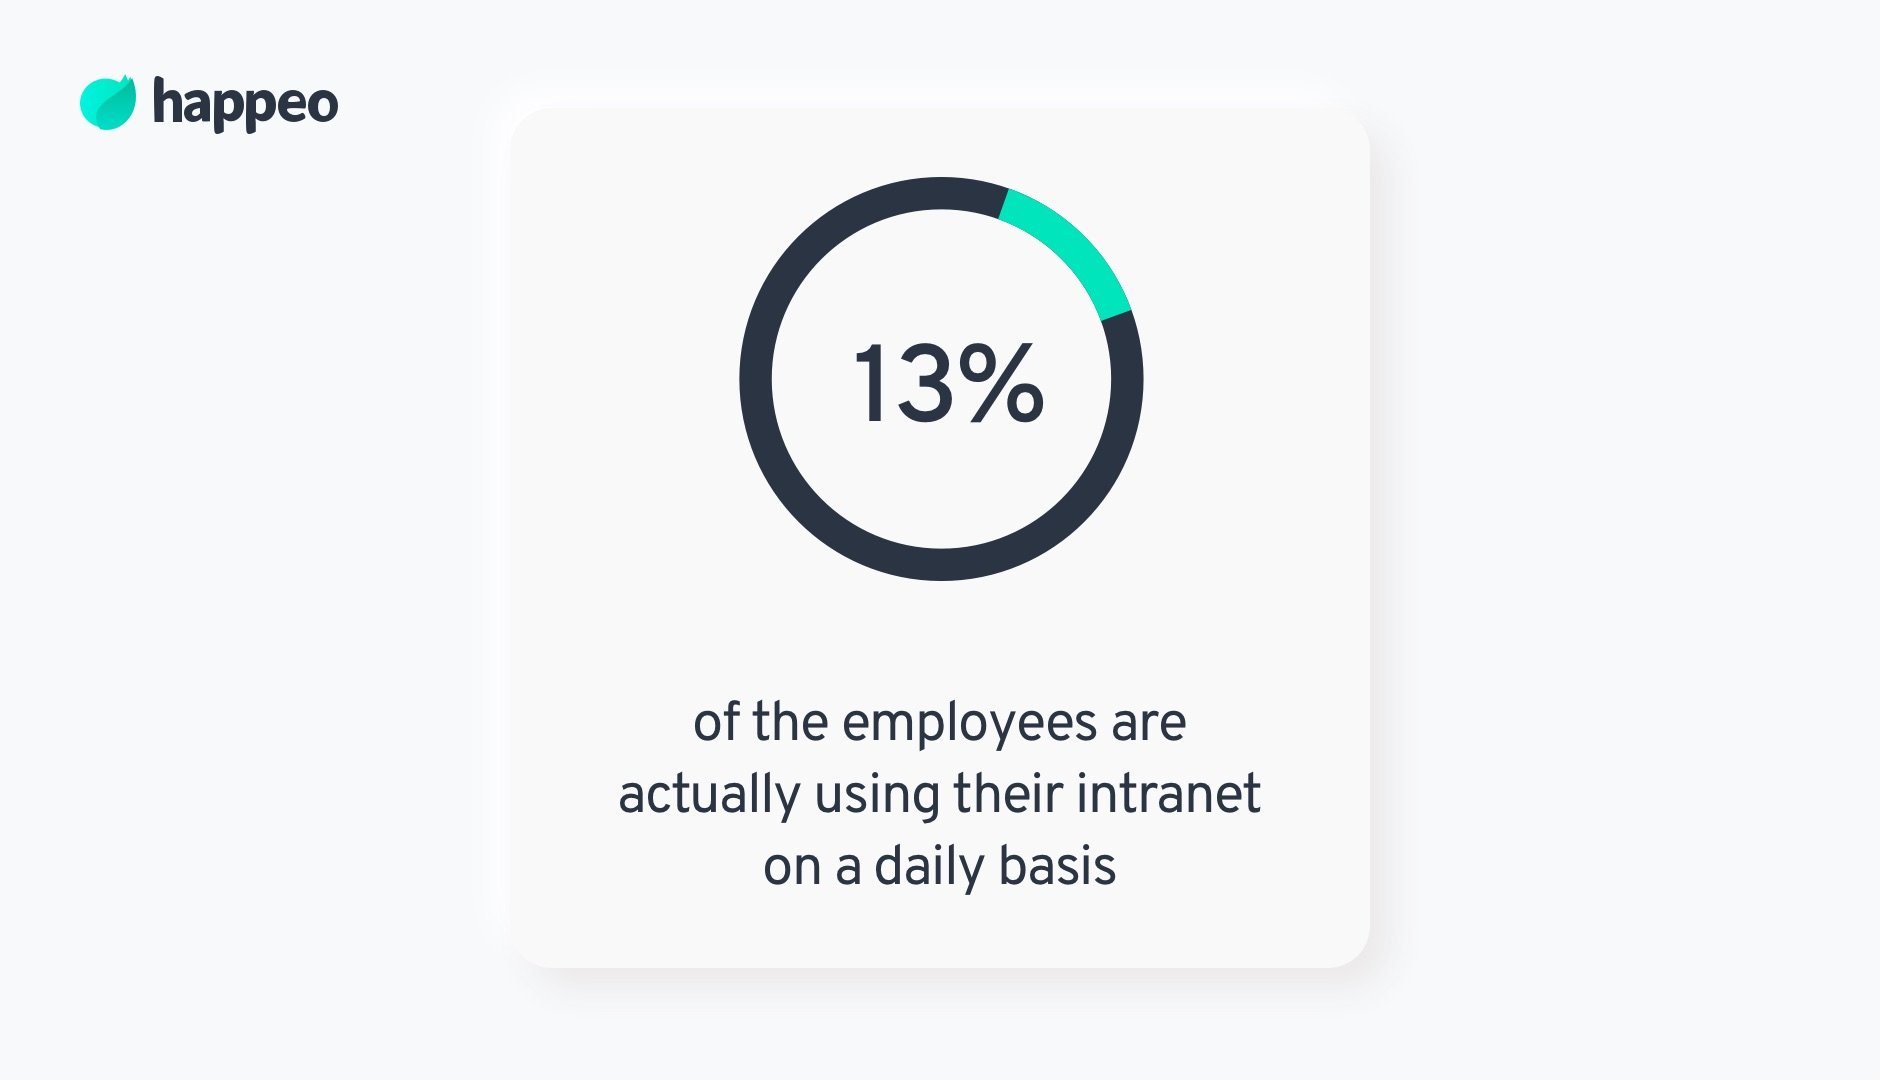 collaboration among employees - daily usage of intranets